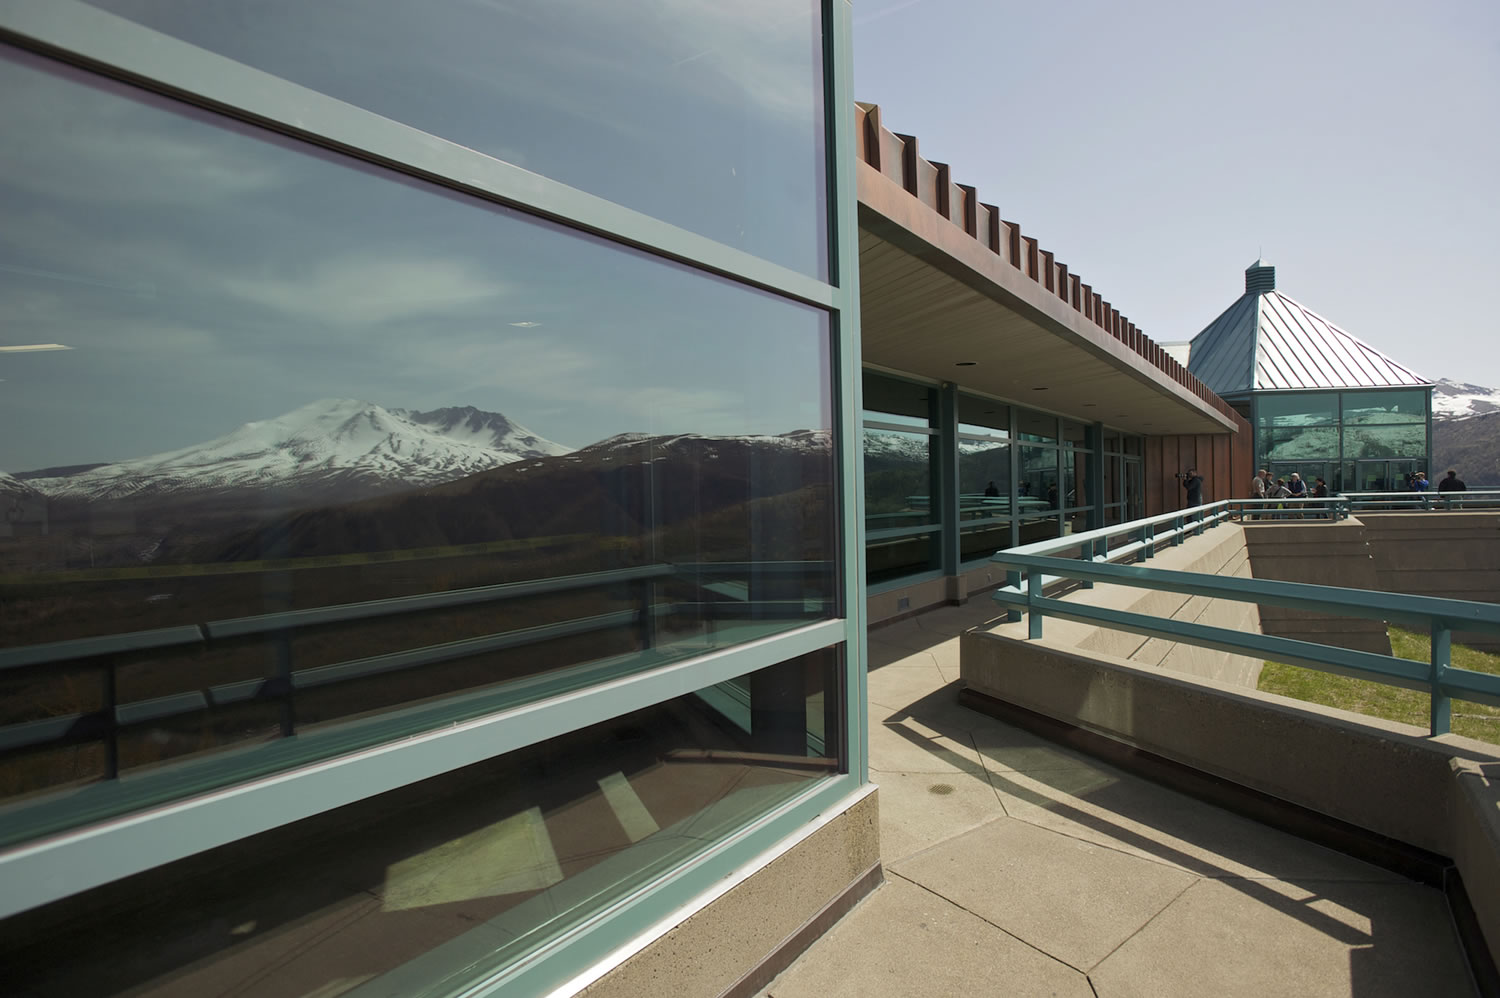 In 2012, the U.S. Forest Service reopened the Coldwater Ridge Visitor Center as the Mount St. Helens Science and Learning Center at Coldwater.